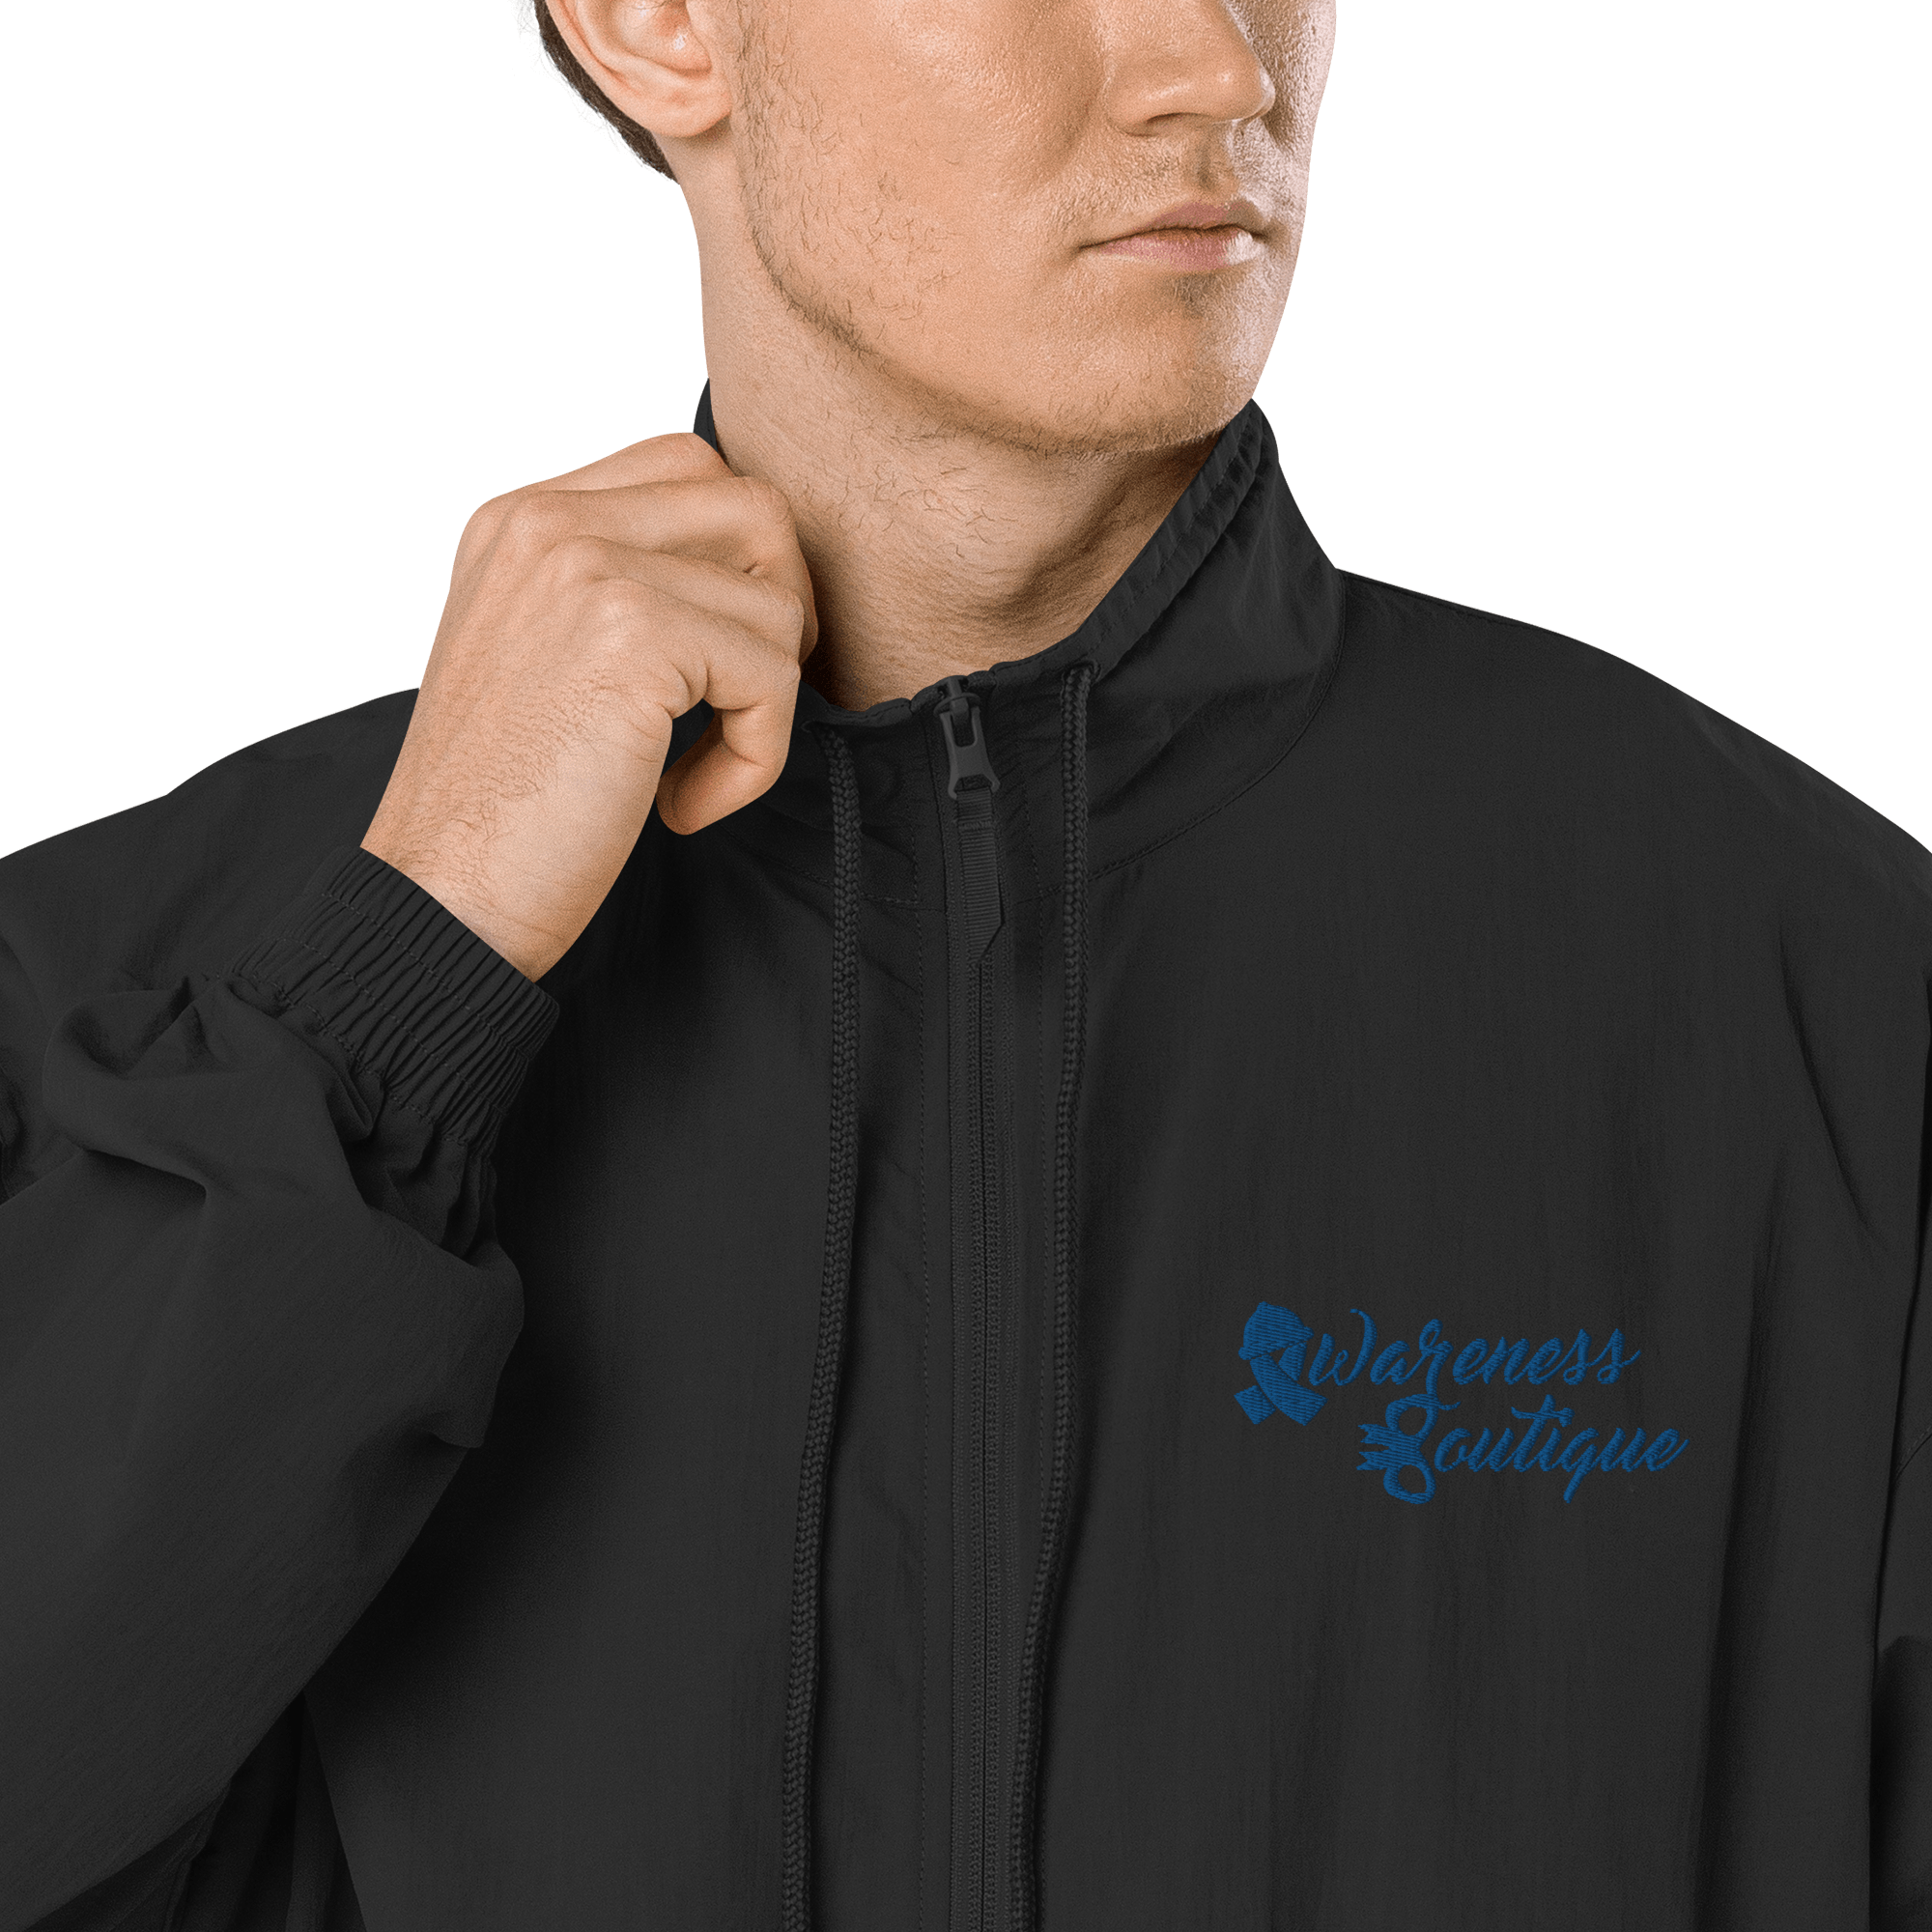 Awareness Boutique Blue Ribbon Recycled Tracksuit Jacket - Awareness Boutique